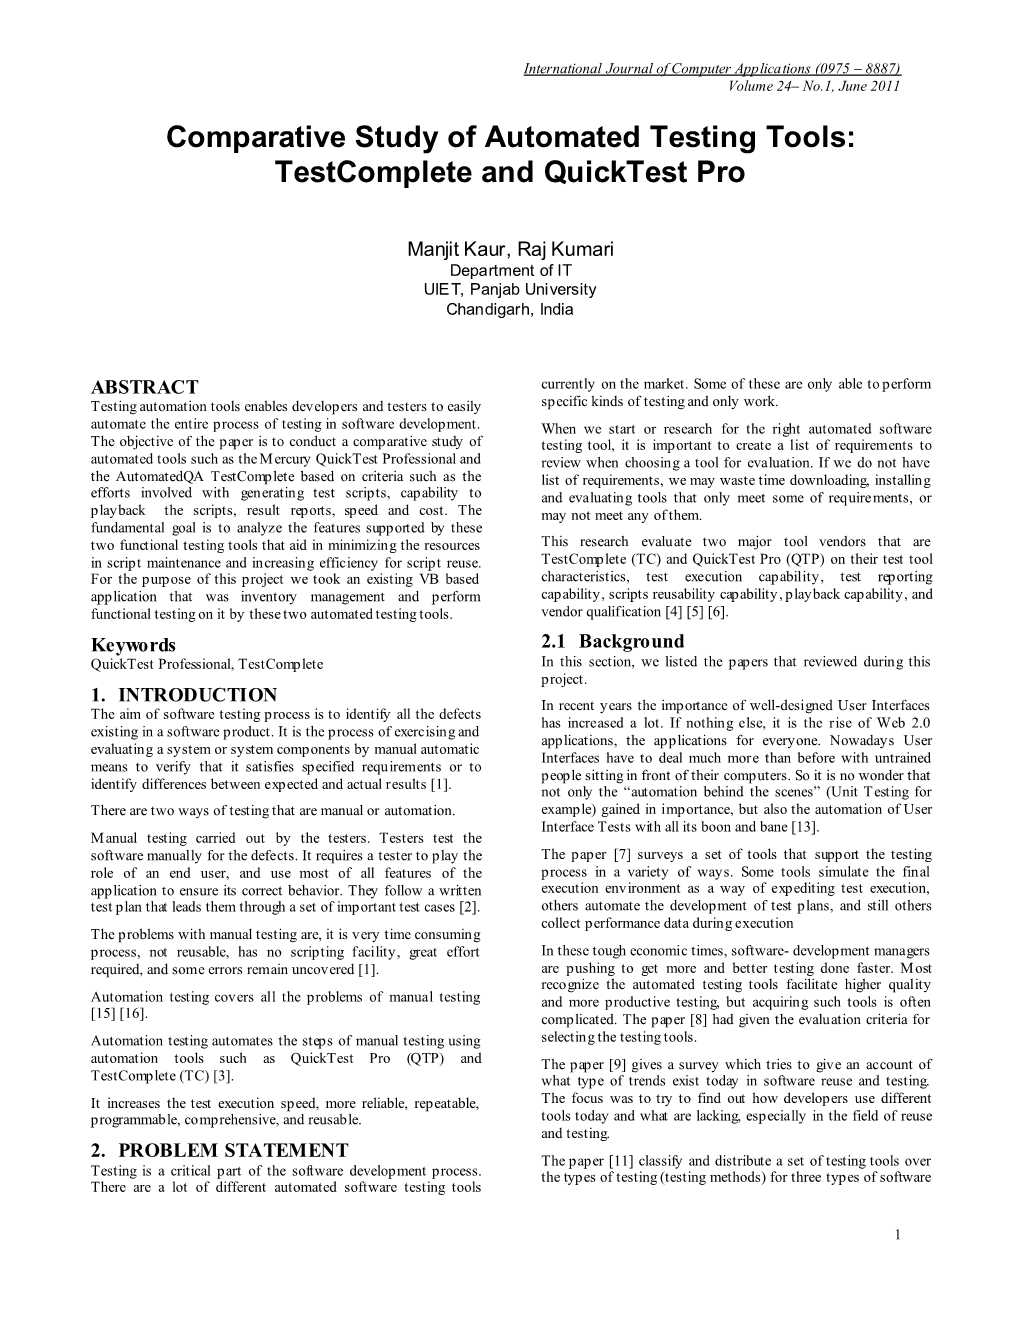 Comparative Study of Automated Testing Tools: Testcomplete and Quicktest Pro